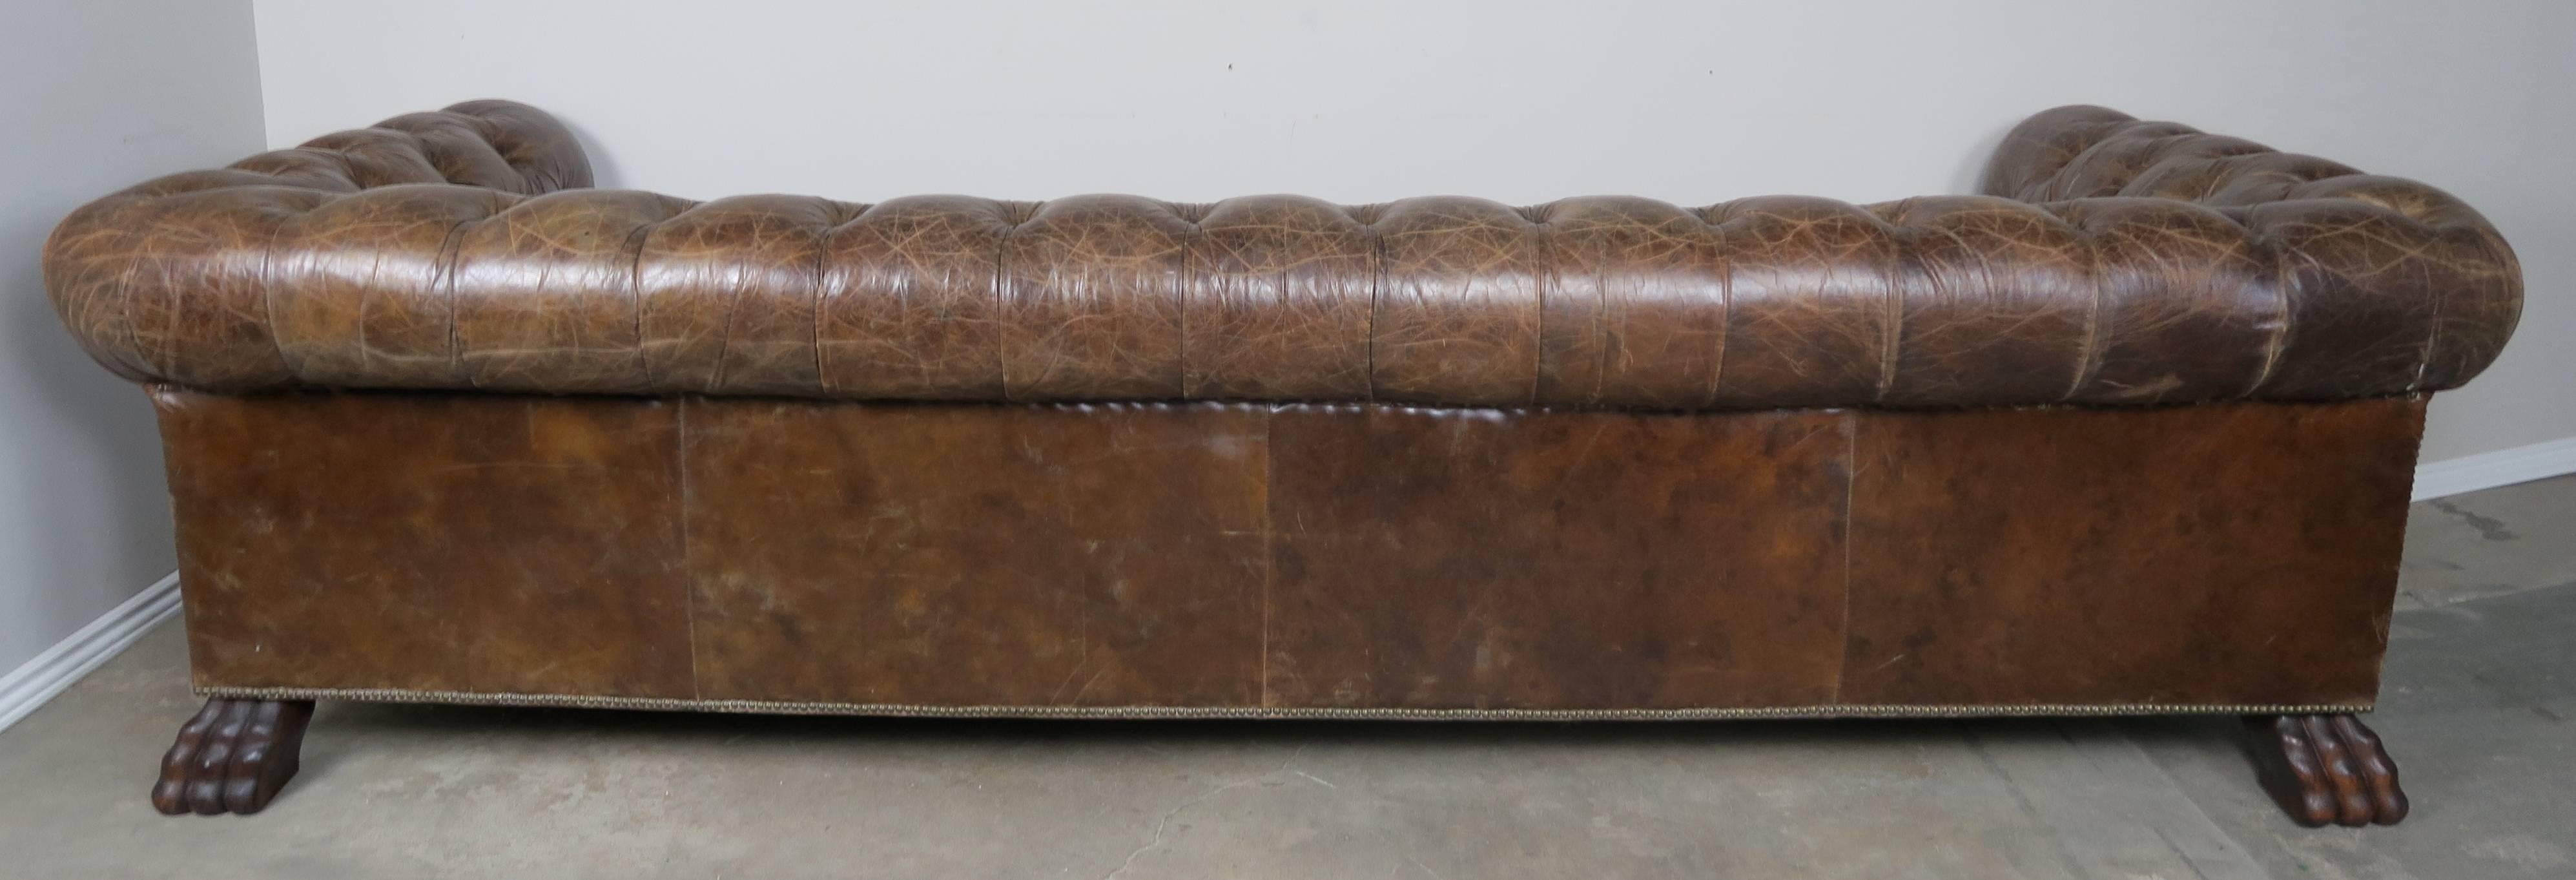 English Leather Tufted Chesterfield Style Sofa with Lion Paw Feet 2